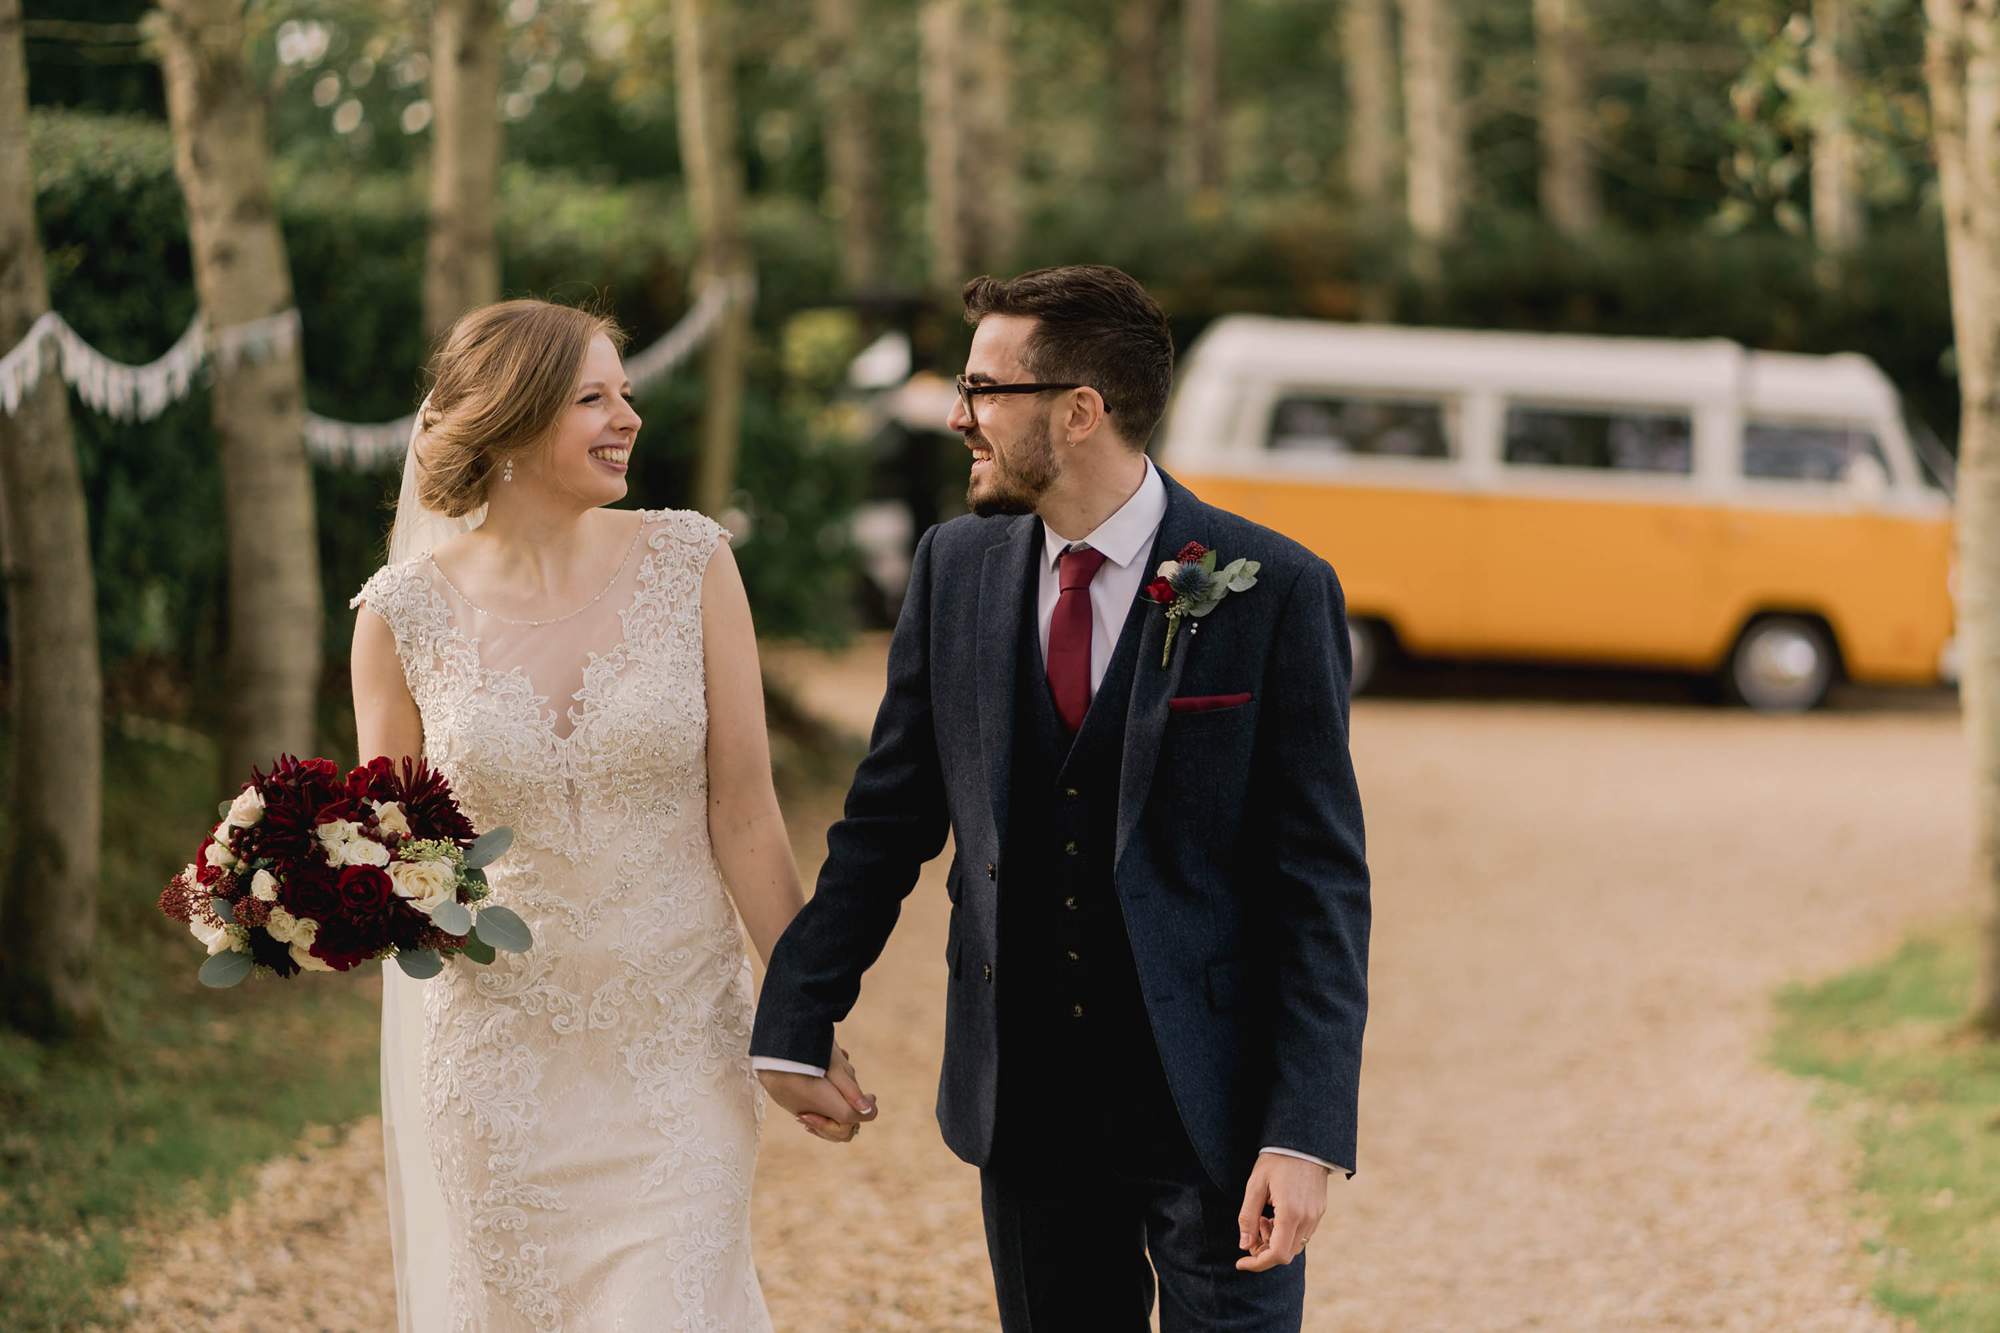 Bride and groom take a walk on their wedding day at Rumbolds Farms wedding venue in Billingshurst, Sussex.